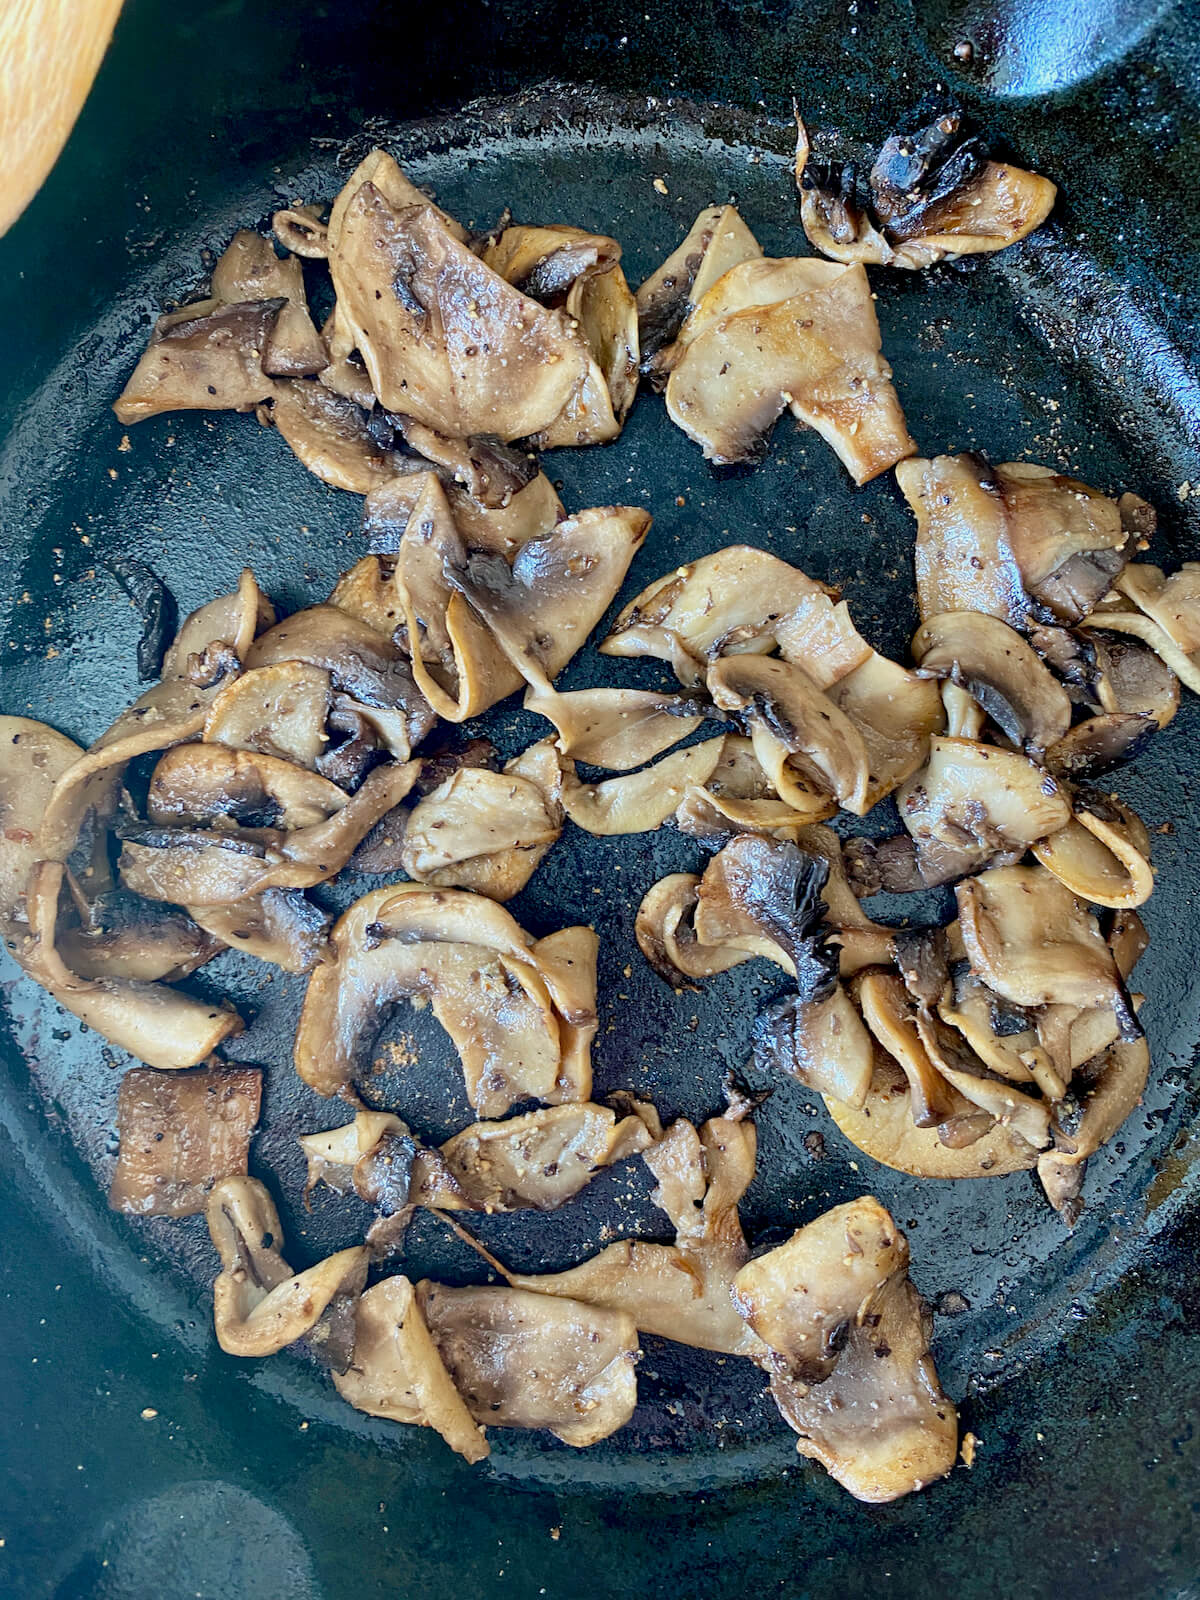 Cooked sliced mushrooms in a cast iron skillet.